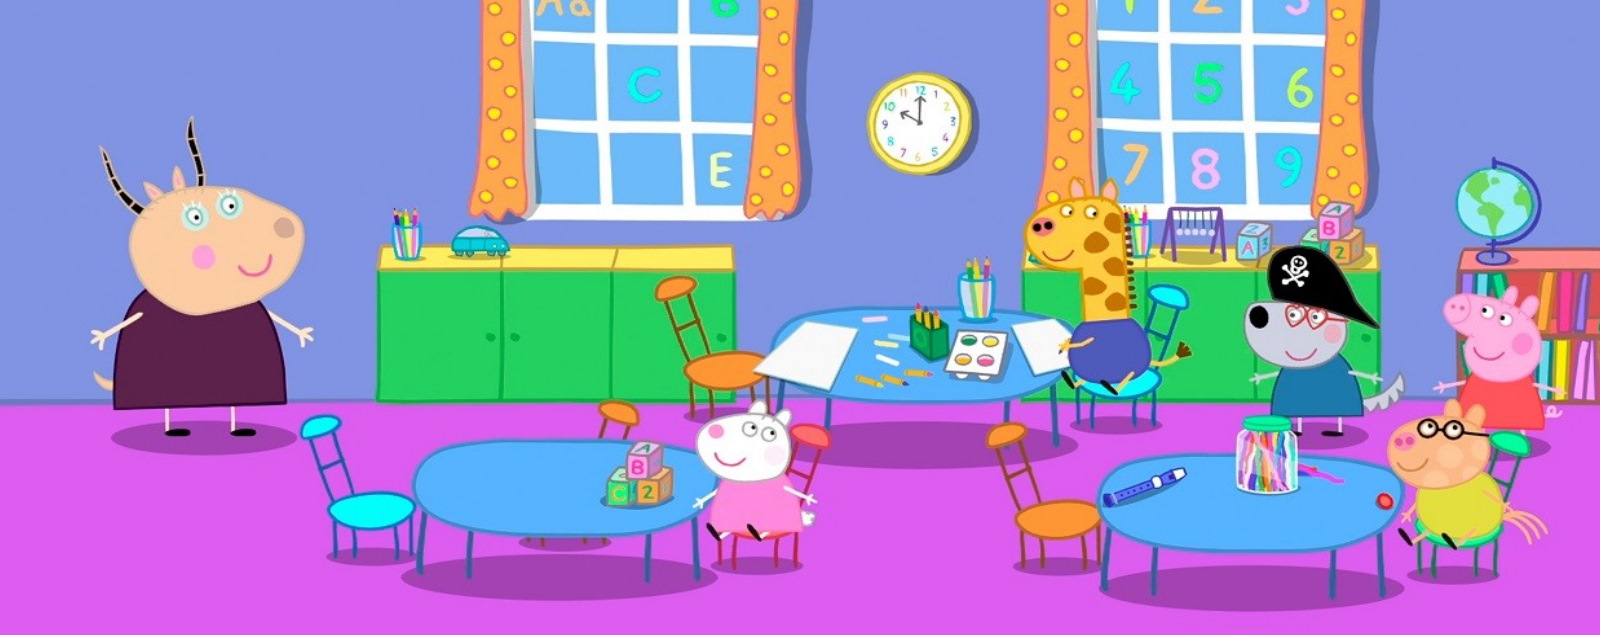 Check out this amazing graphics comparison video for My Friend Peppa Pig |  TheSixthAxis